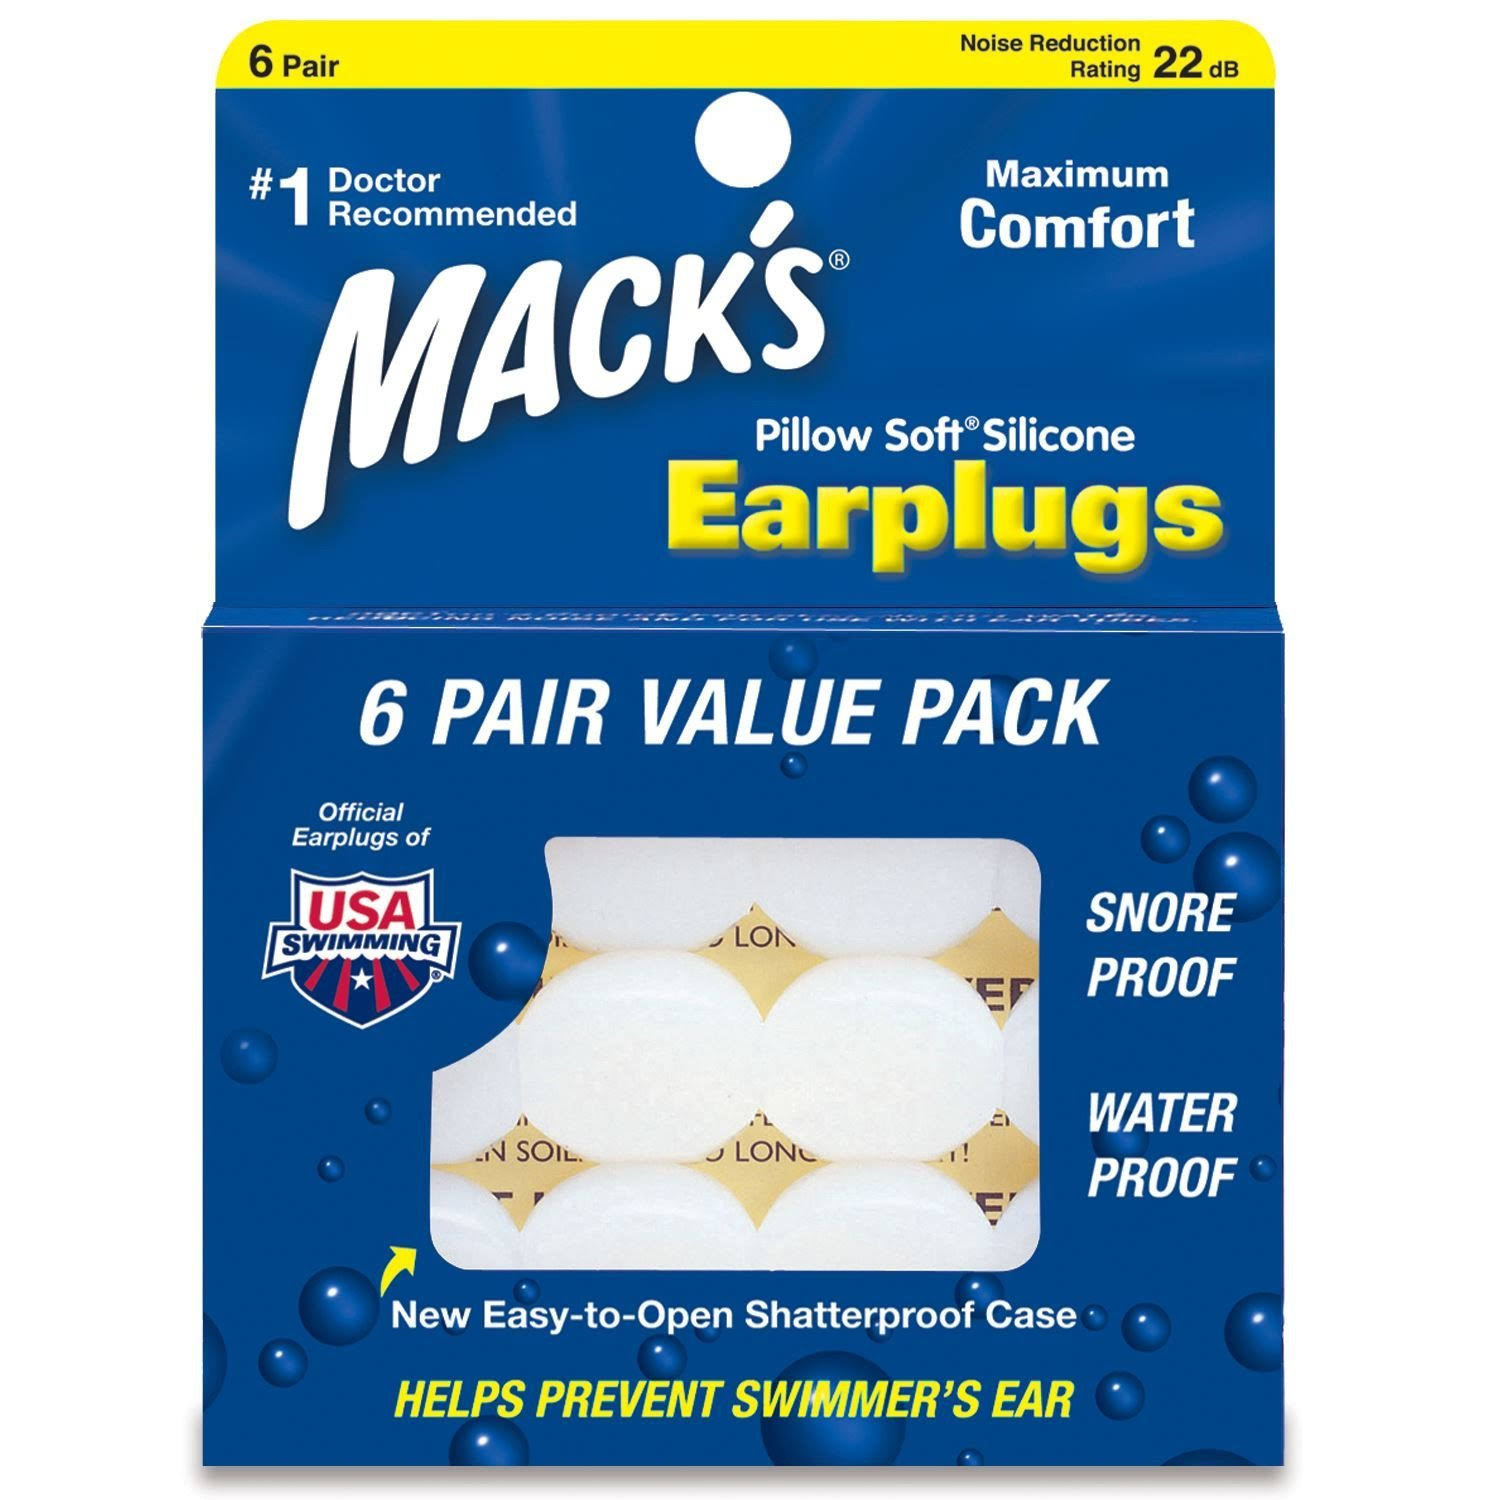 Mack's Pillow Soft Silicone Putty Earplugs Value Pack - 6 Pair